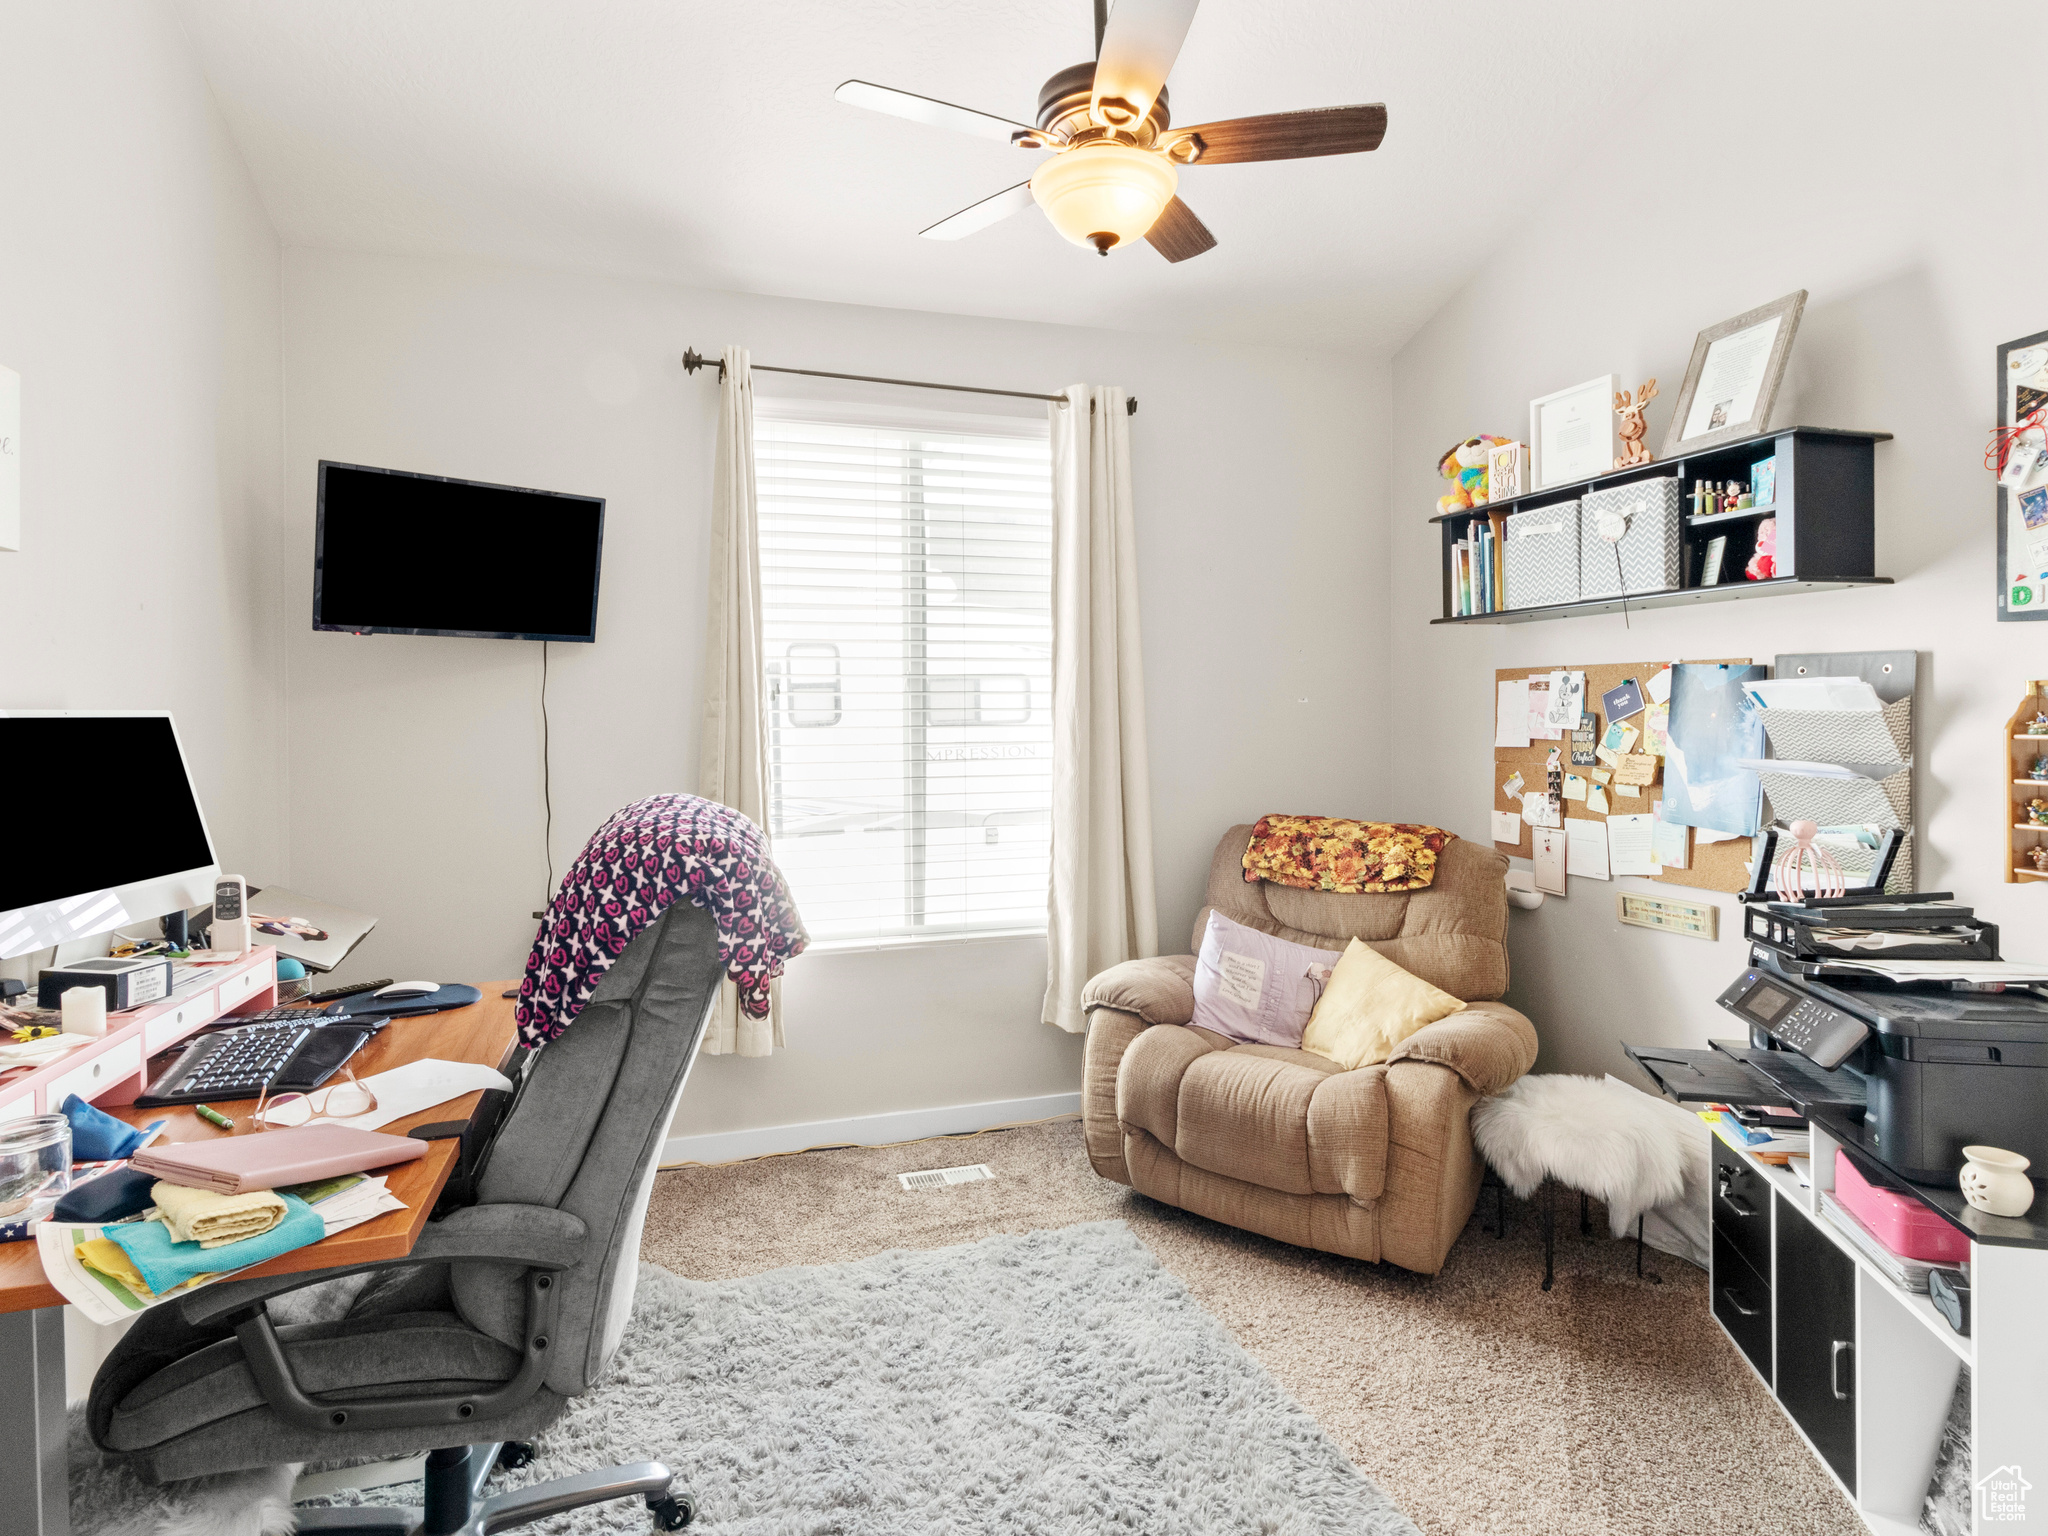 Home office featuring ceiling fan, a healthy amount of sunlight, and carpet floors